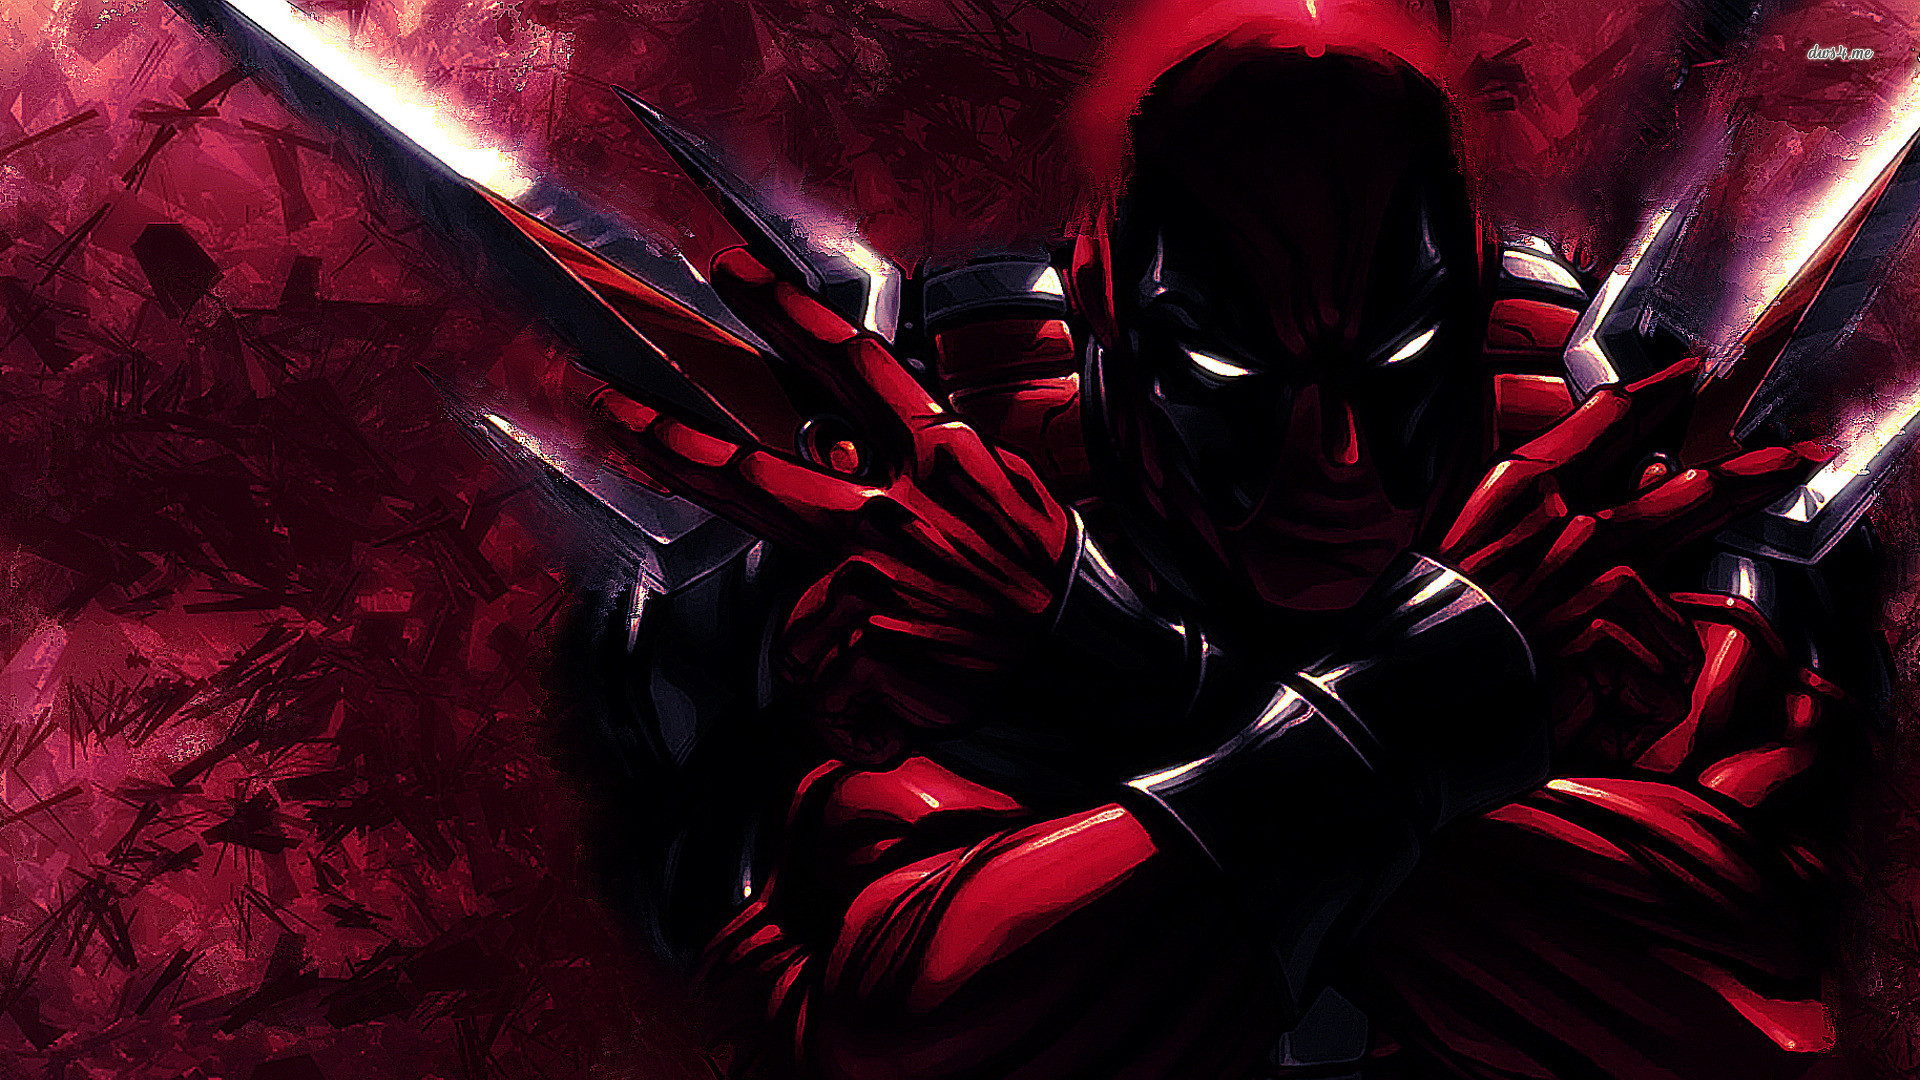 1920x1080 The 'Deadpool' Movie is Still Alive According to X-Men Producer!